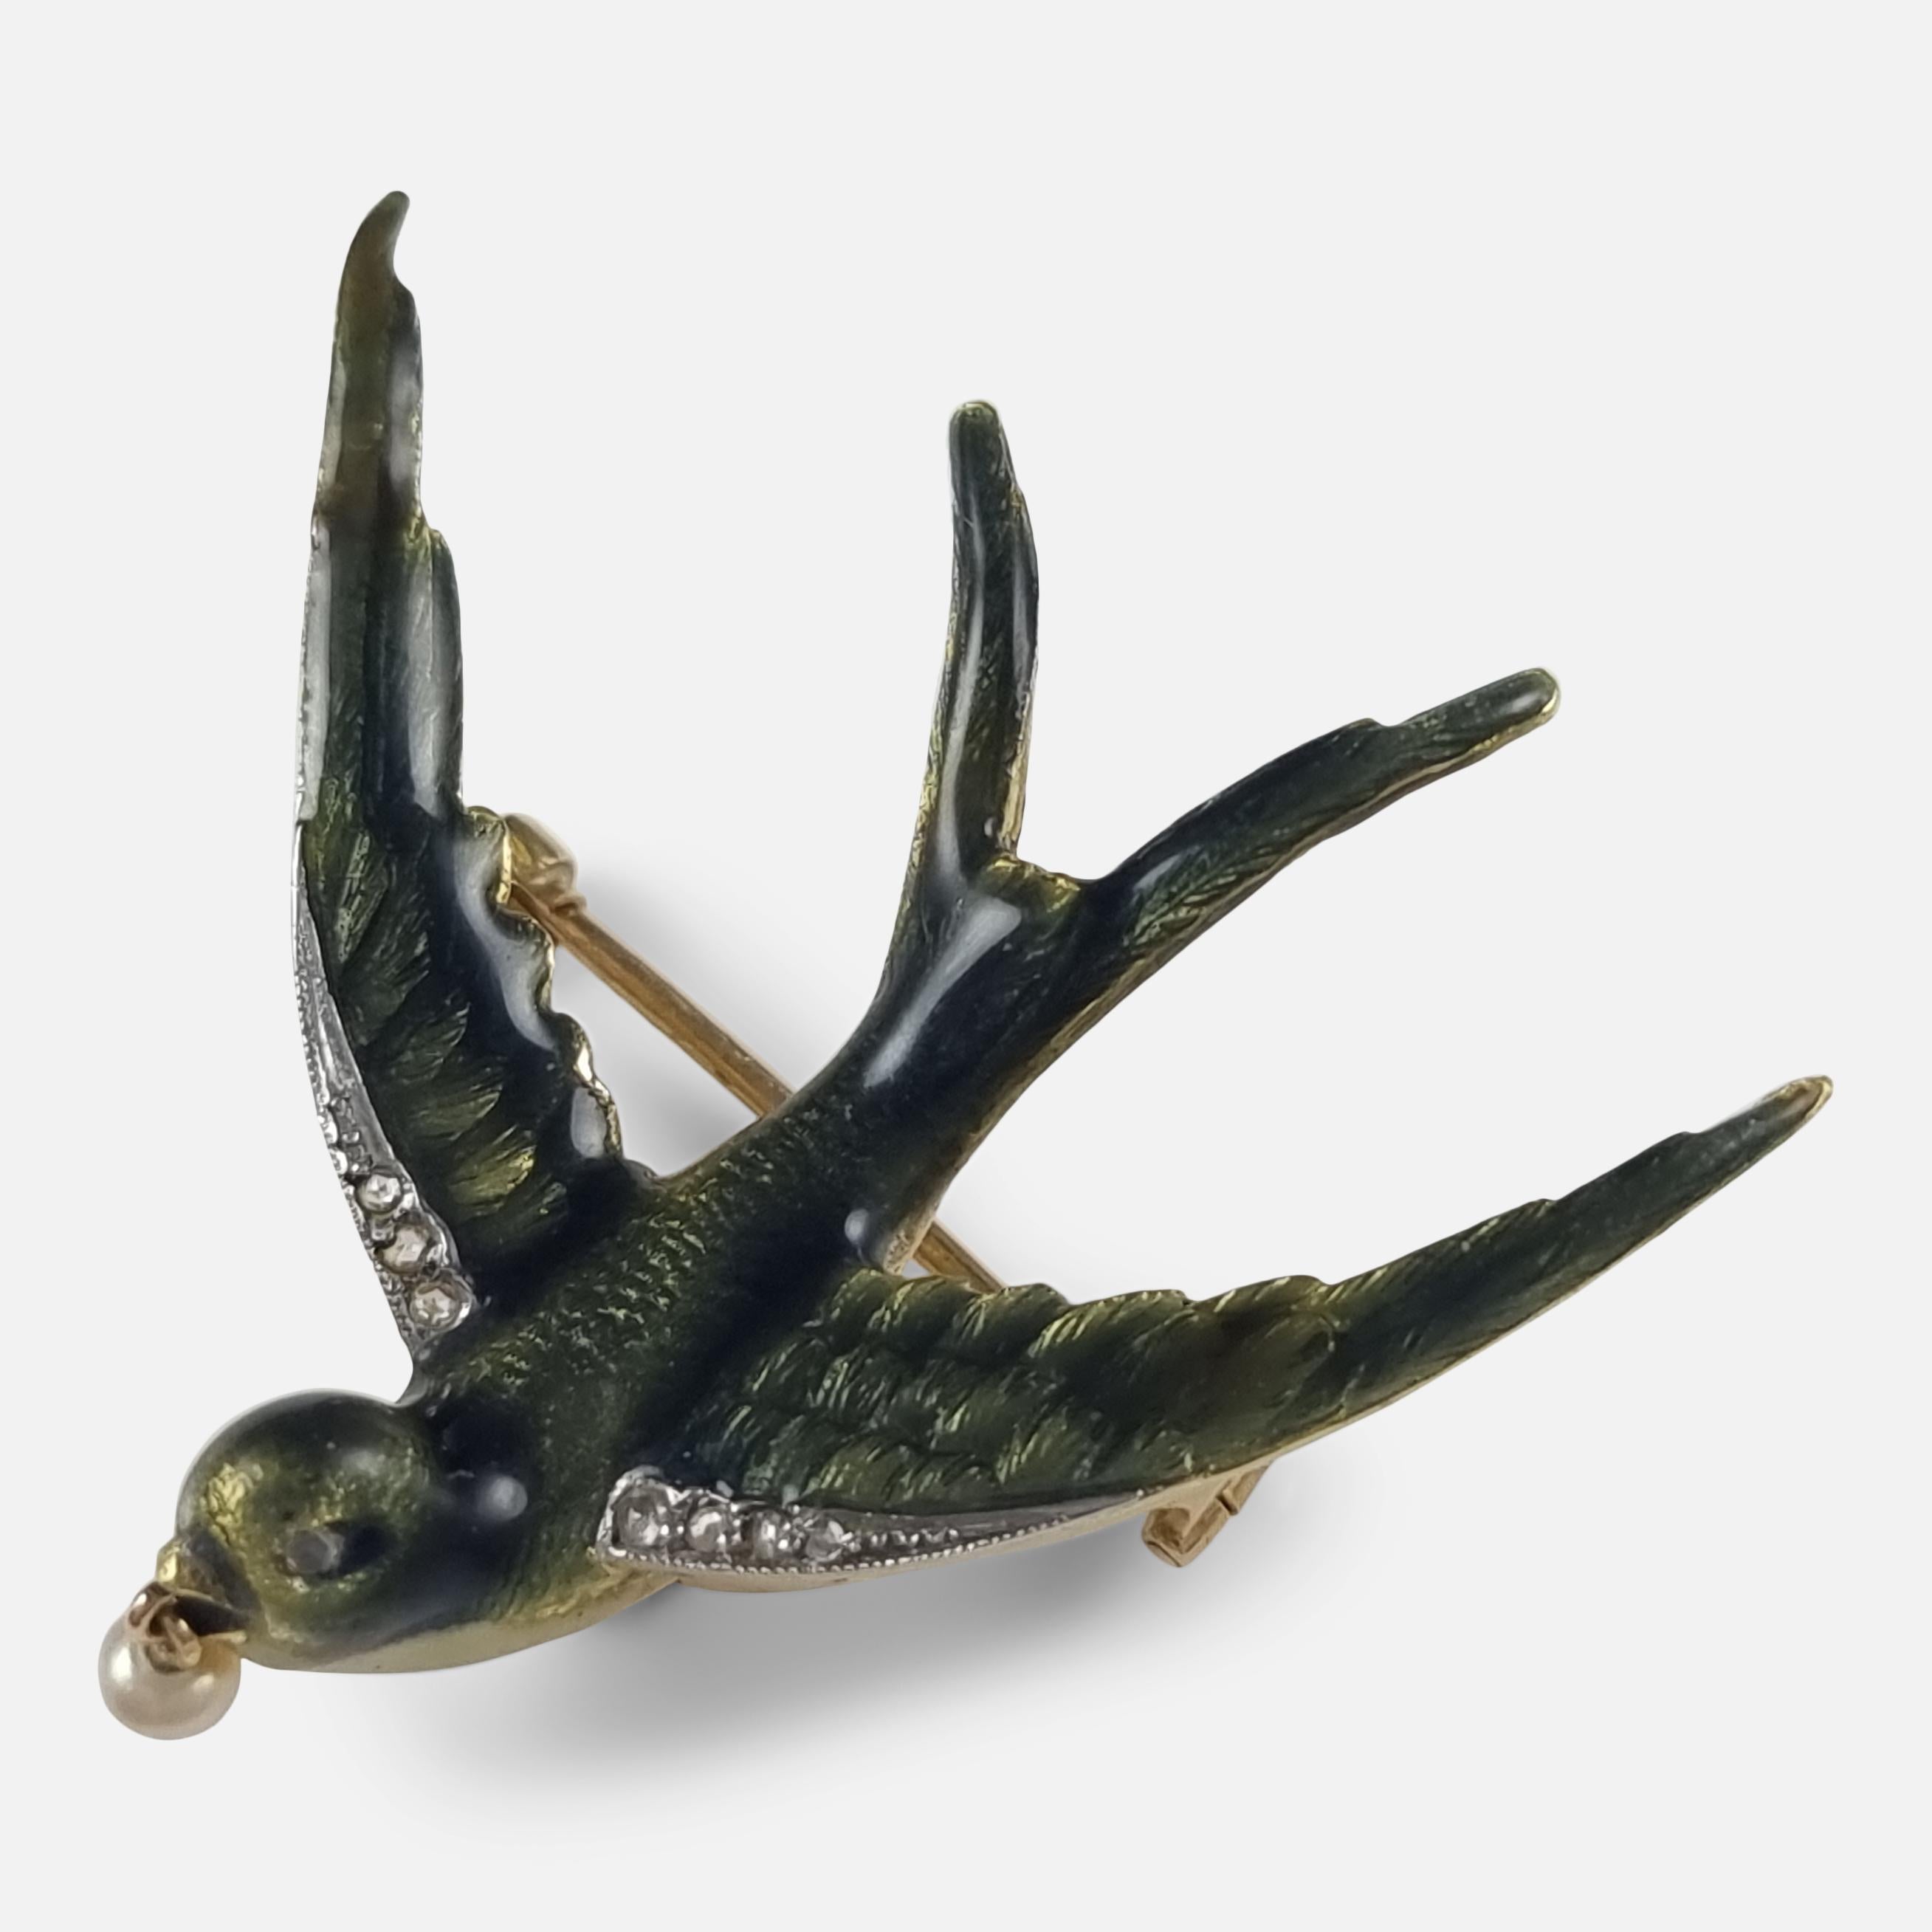 An early 20th century swallow brooch. The brooch is in the form of a swallow, with realistically engraved feathers, green enamel decoration, wings and eye set with rose-cut diamonds, and holding a small pearl in its beak. During the 19th and early